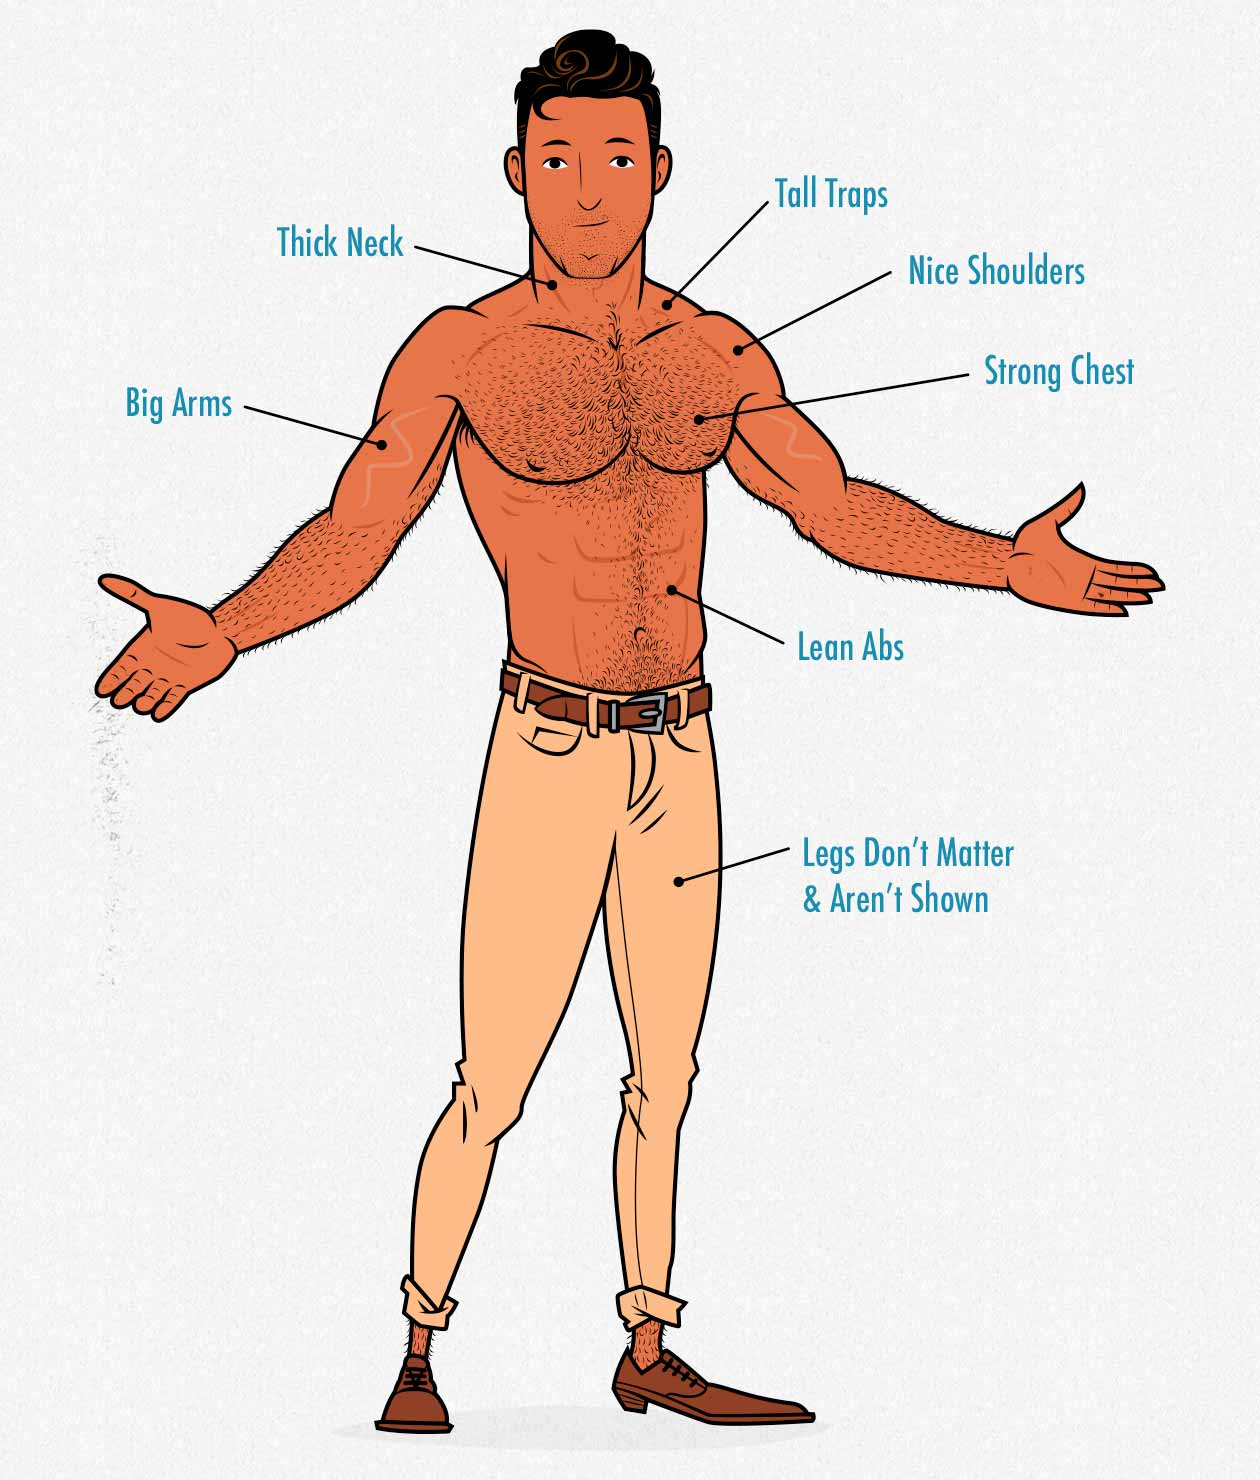 Illustration showing a man with a Hollywood physique.